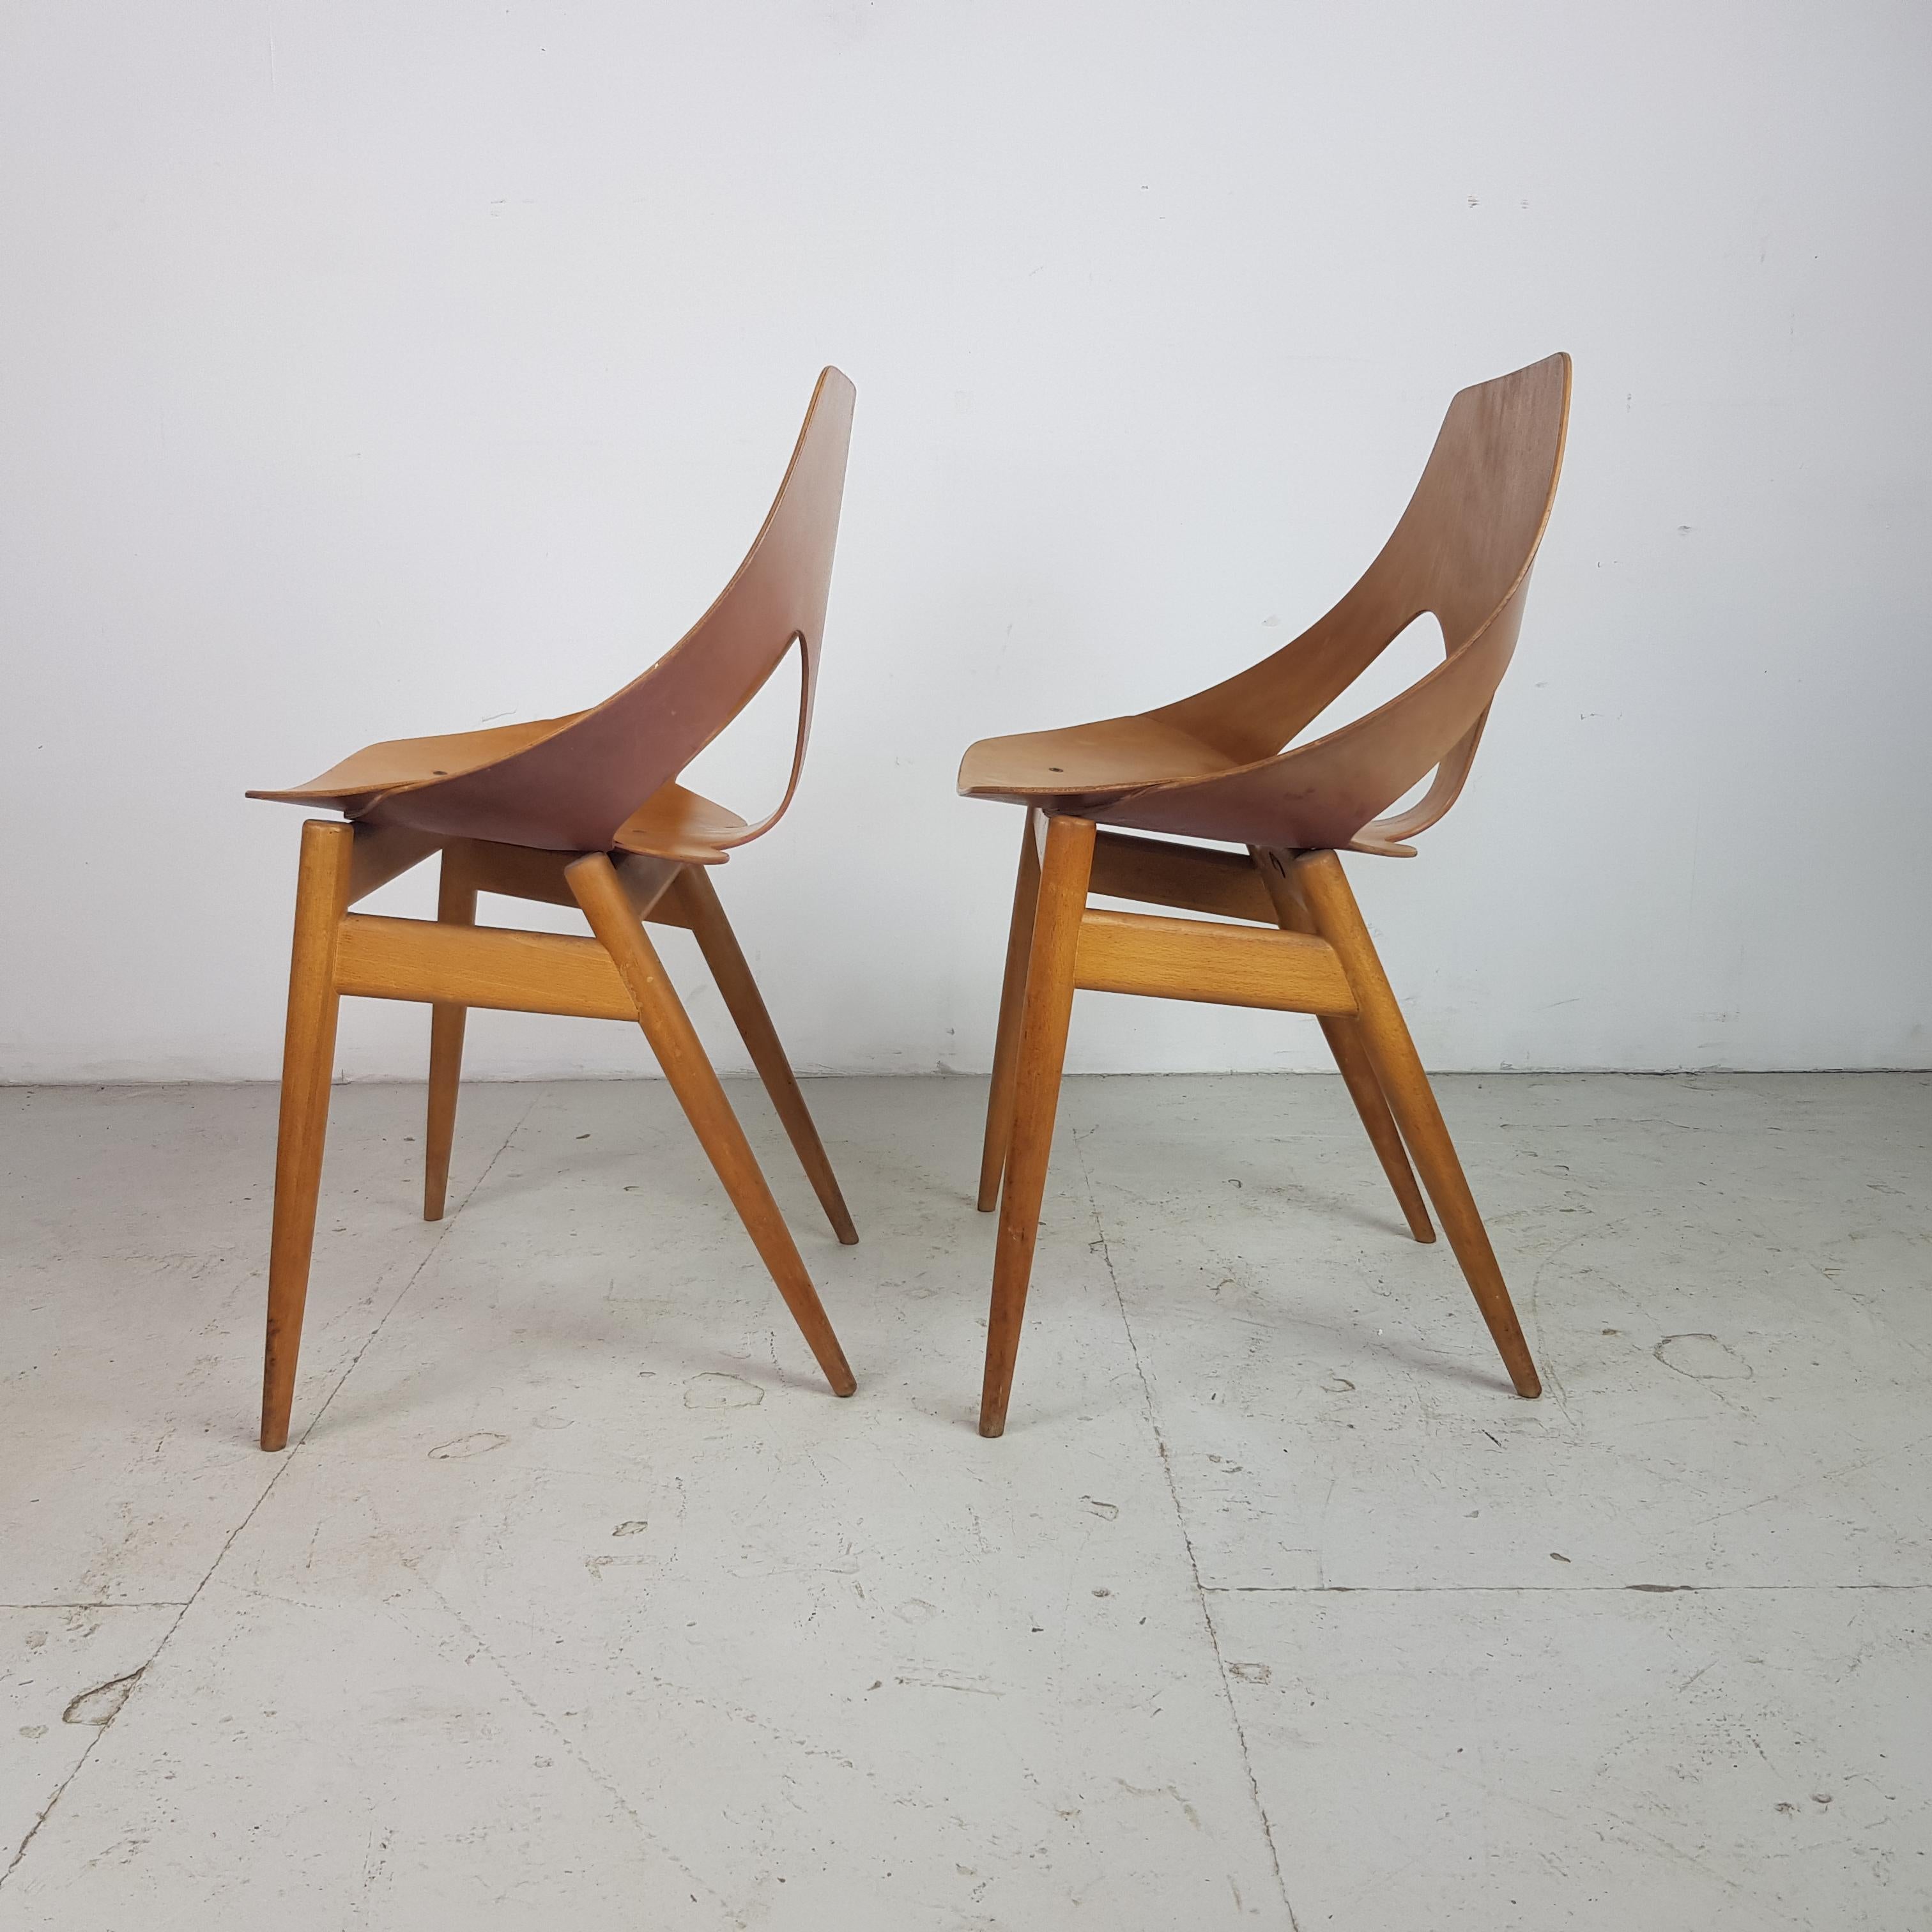 Pair of 1950s Jason Chairs Designed by Carl Jacobs & Frank Guille for Kandya In Good Condition For Sale In Lewes, East Sussex